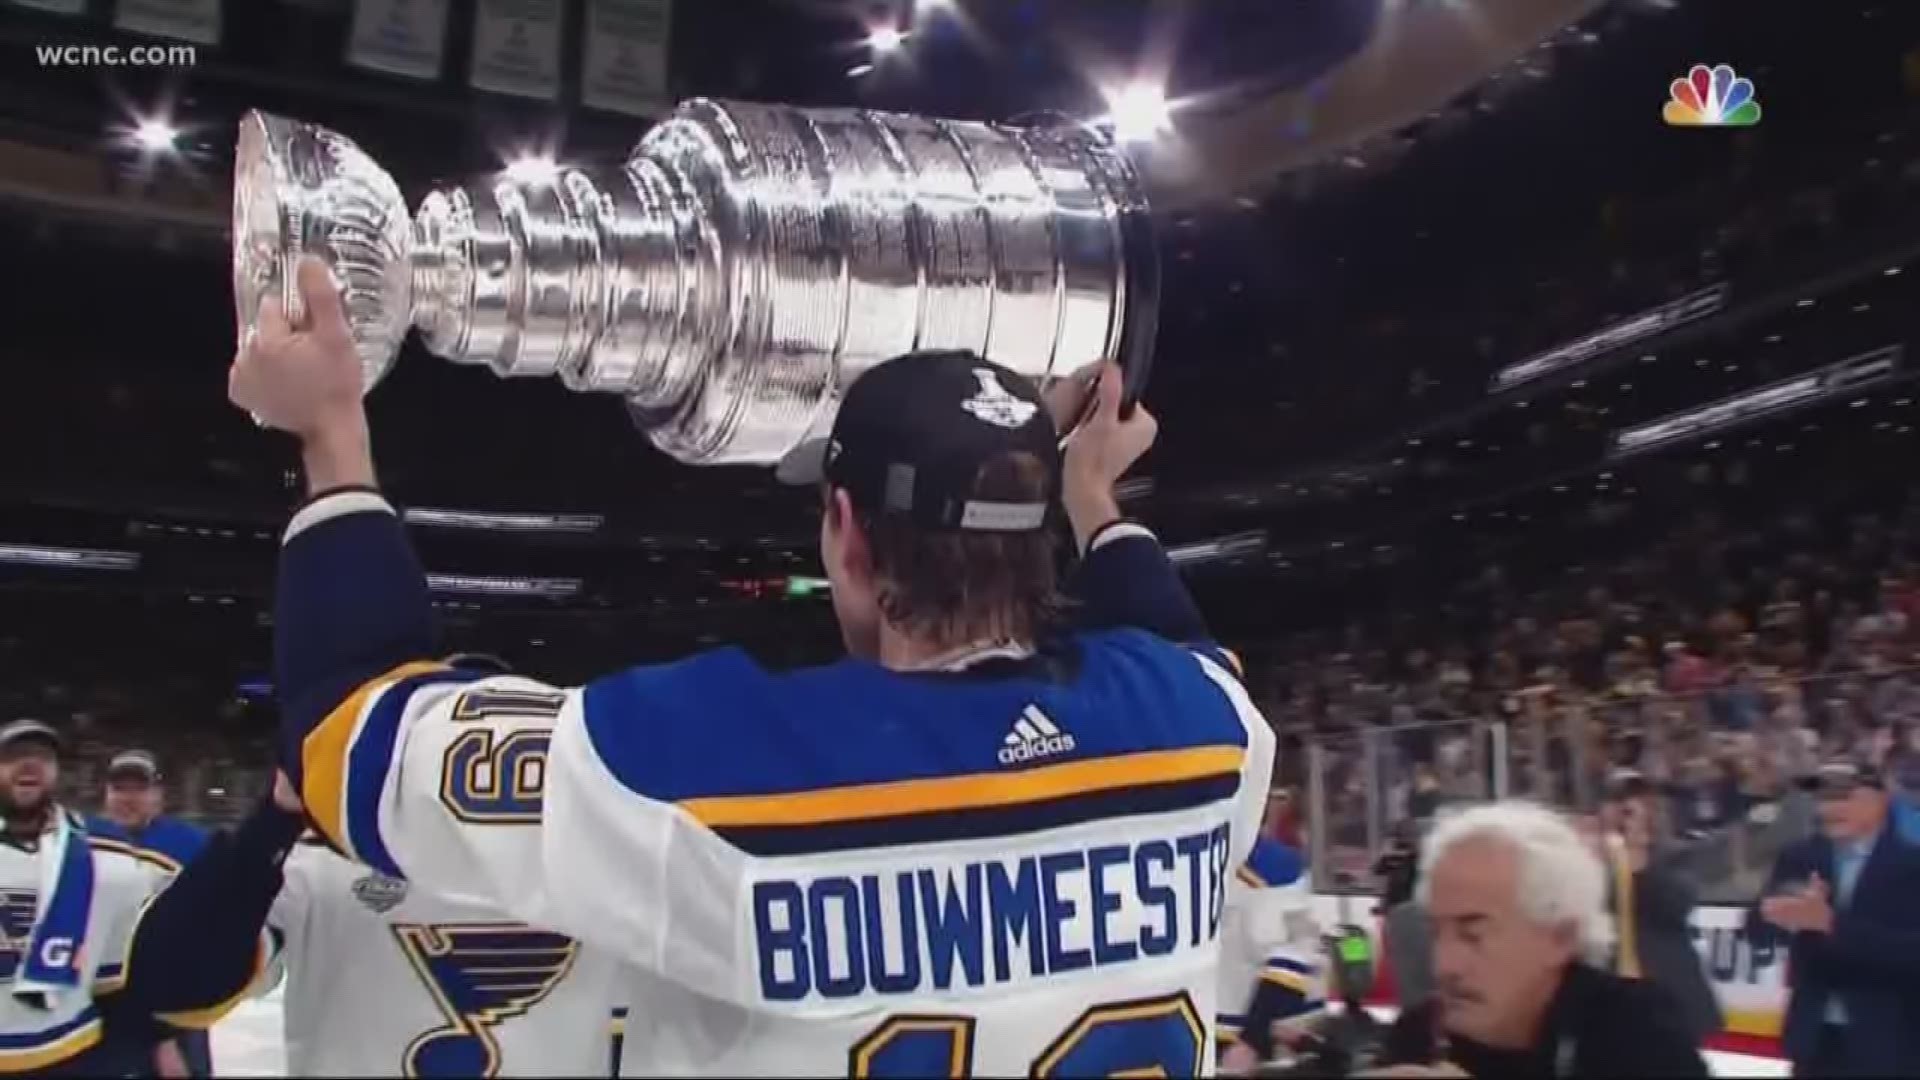 Blues celebrate first championship, pass Stanley Cup (video